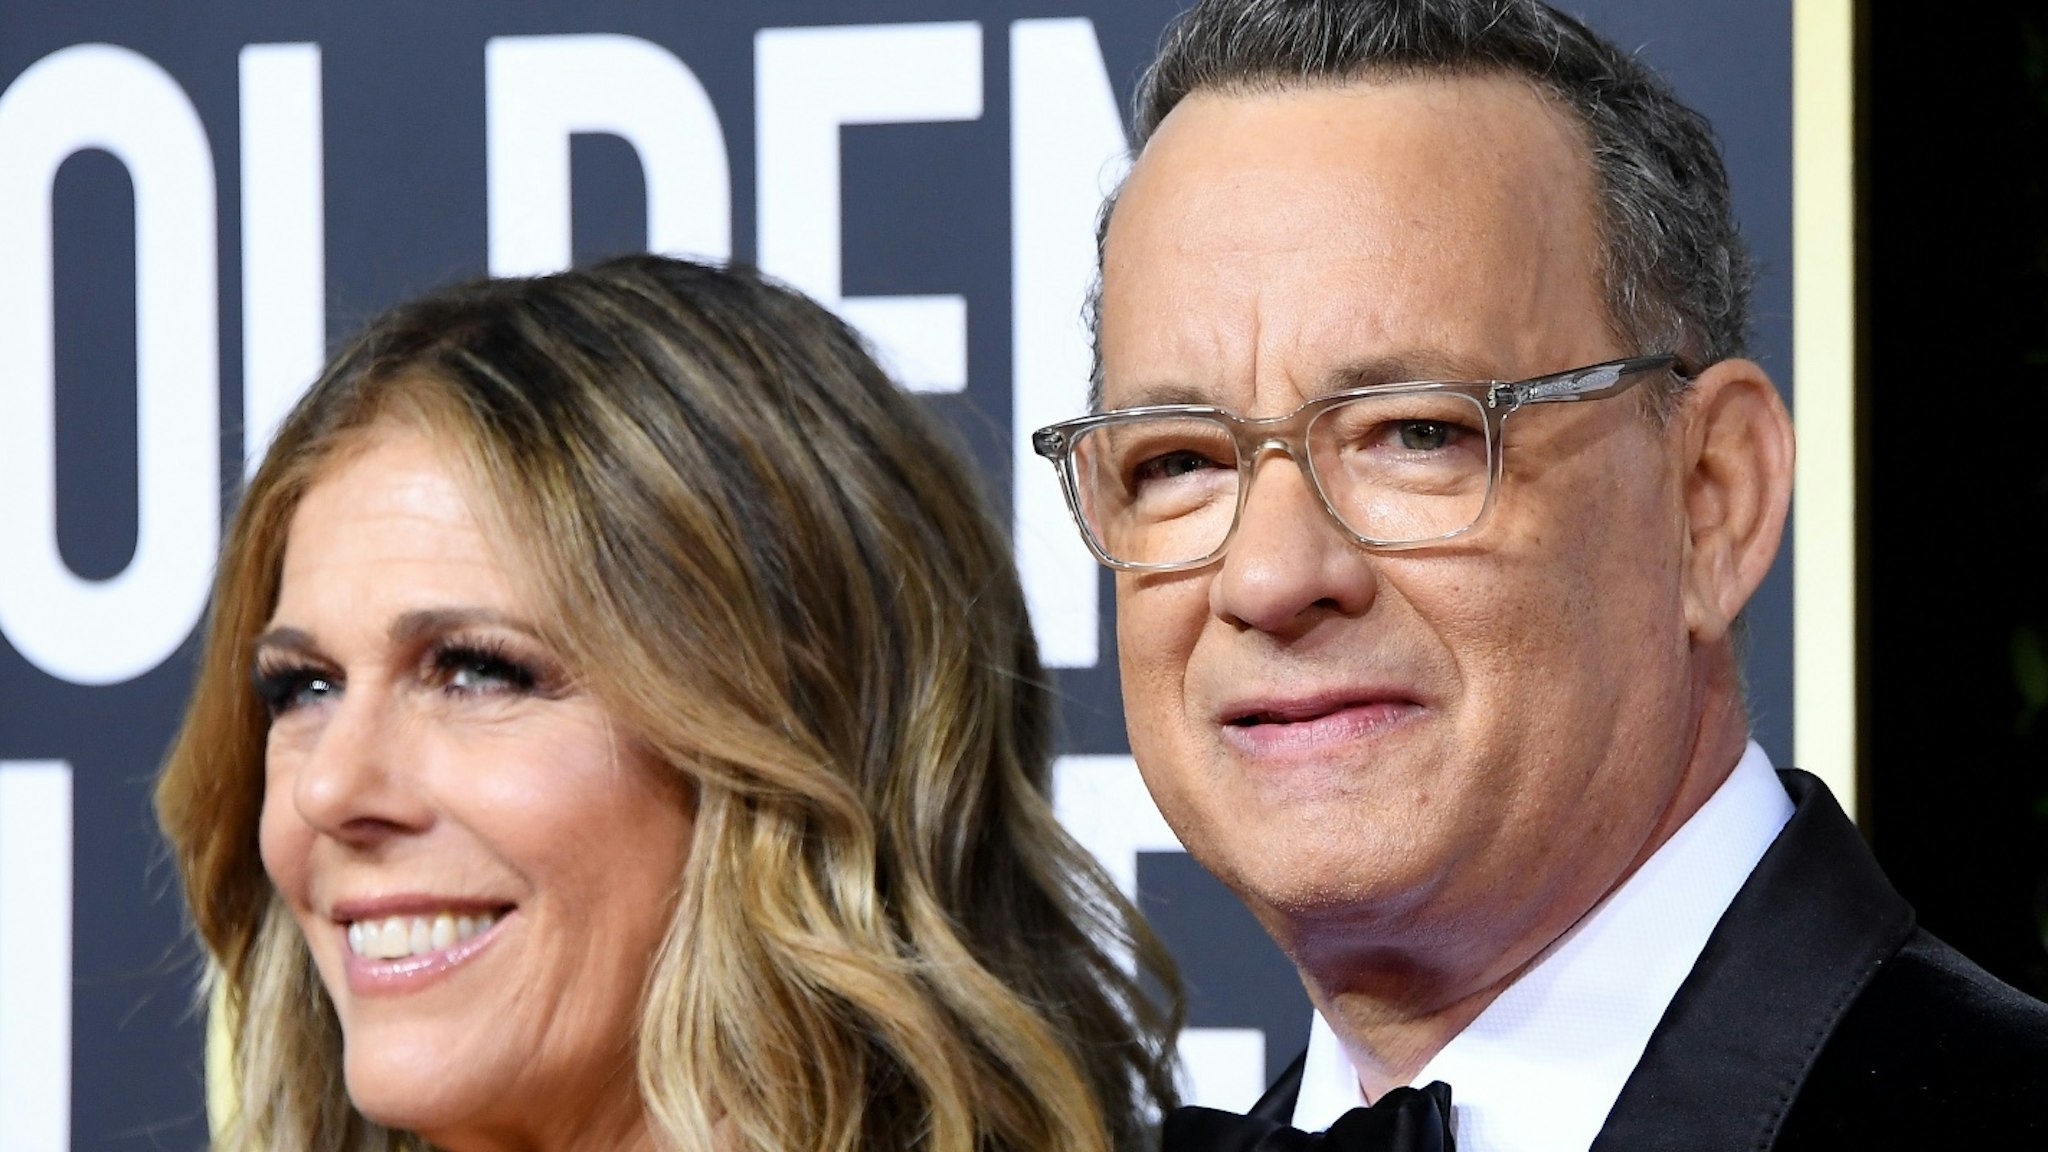 Rita Wilson and Tom Hanks attend the 77th Annual Golden Globe Awards at The Beverly Hilton Hotel on January 05, 2020 in Beverly Hills, California.